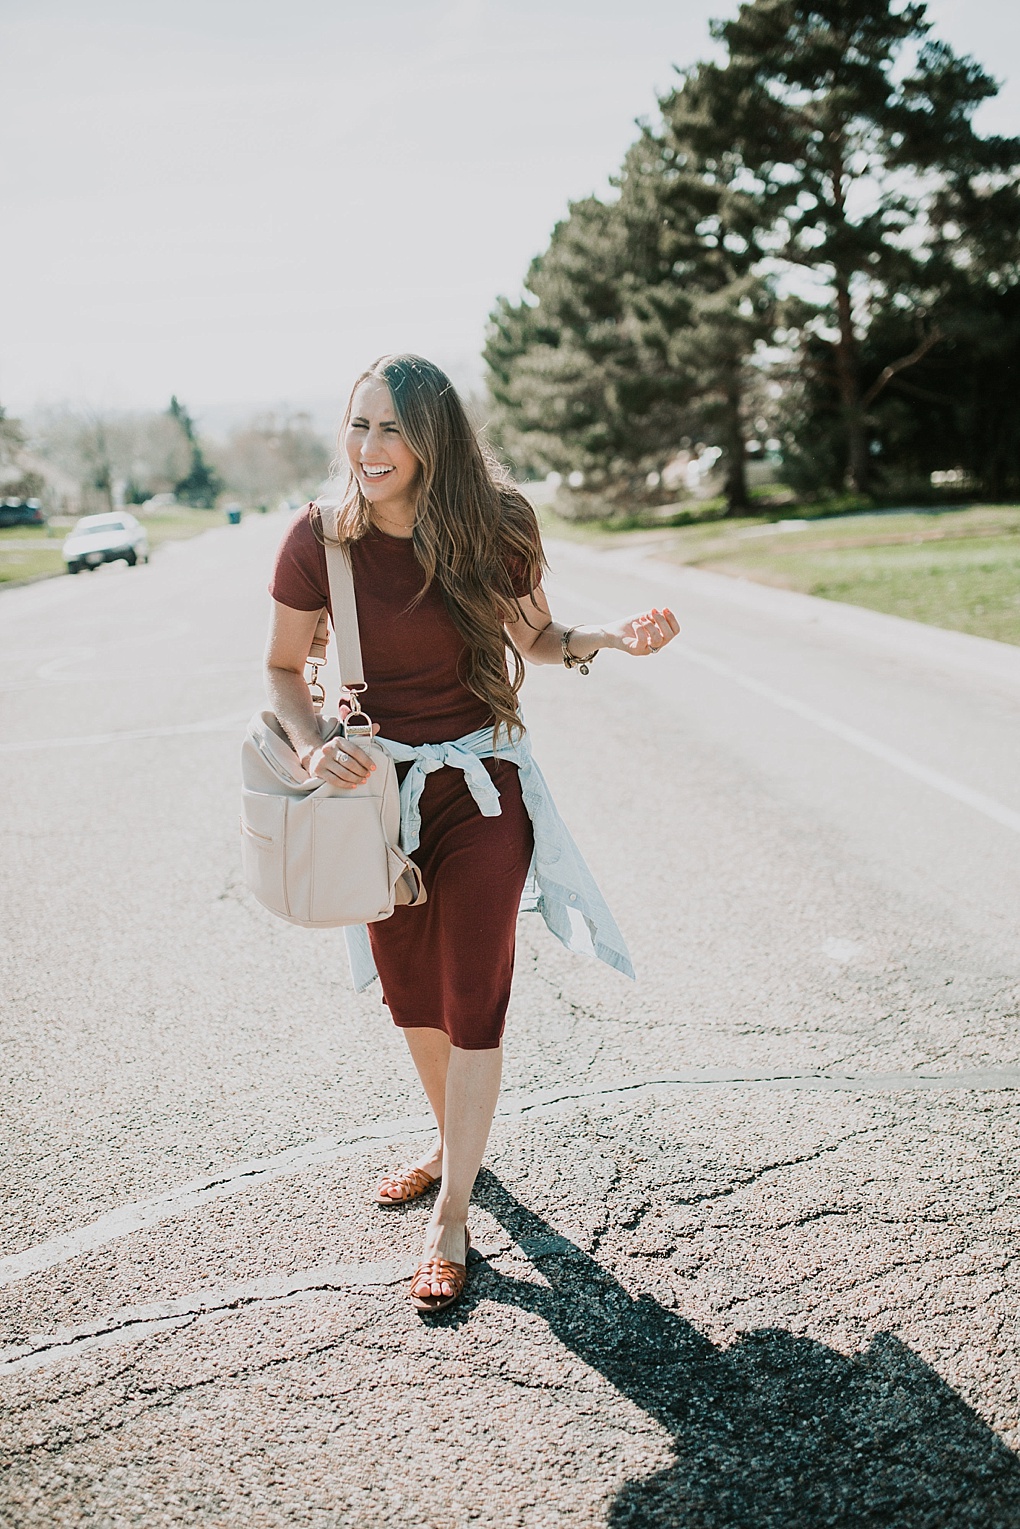 girl standing in road in maroon t shirt dress with target sandals and long loosely curled brown hair with caramel highlights with denim shirt tied around waist and fawn design bag